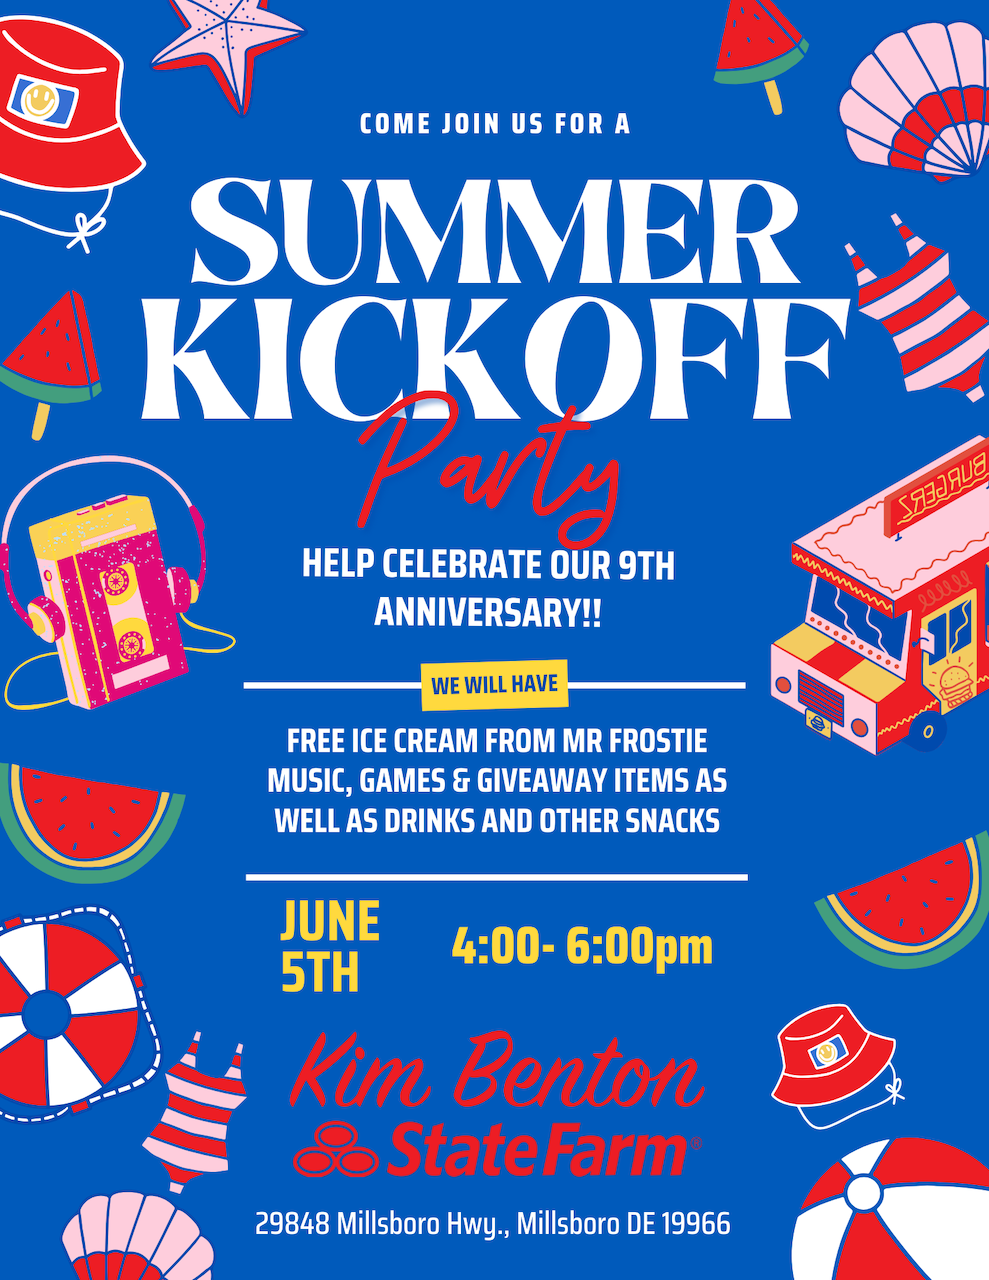 Help celebrate our 9th anniversary! We will have free ice cream from Mr. Frostie, music, games & giv Kim Benton - State Farm Insurance Agent Millsboro (302)934-9393